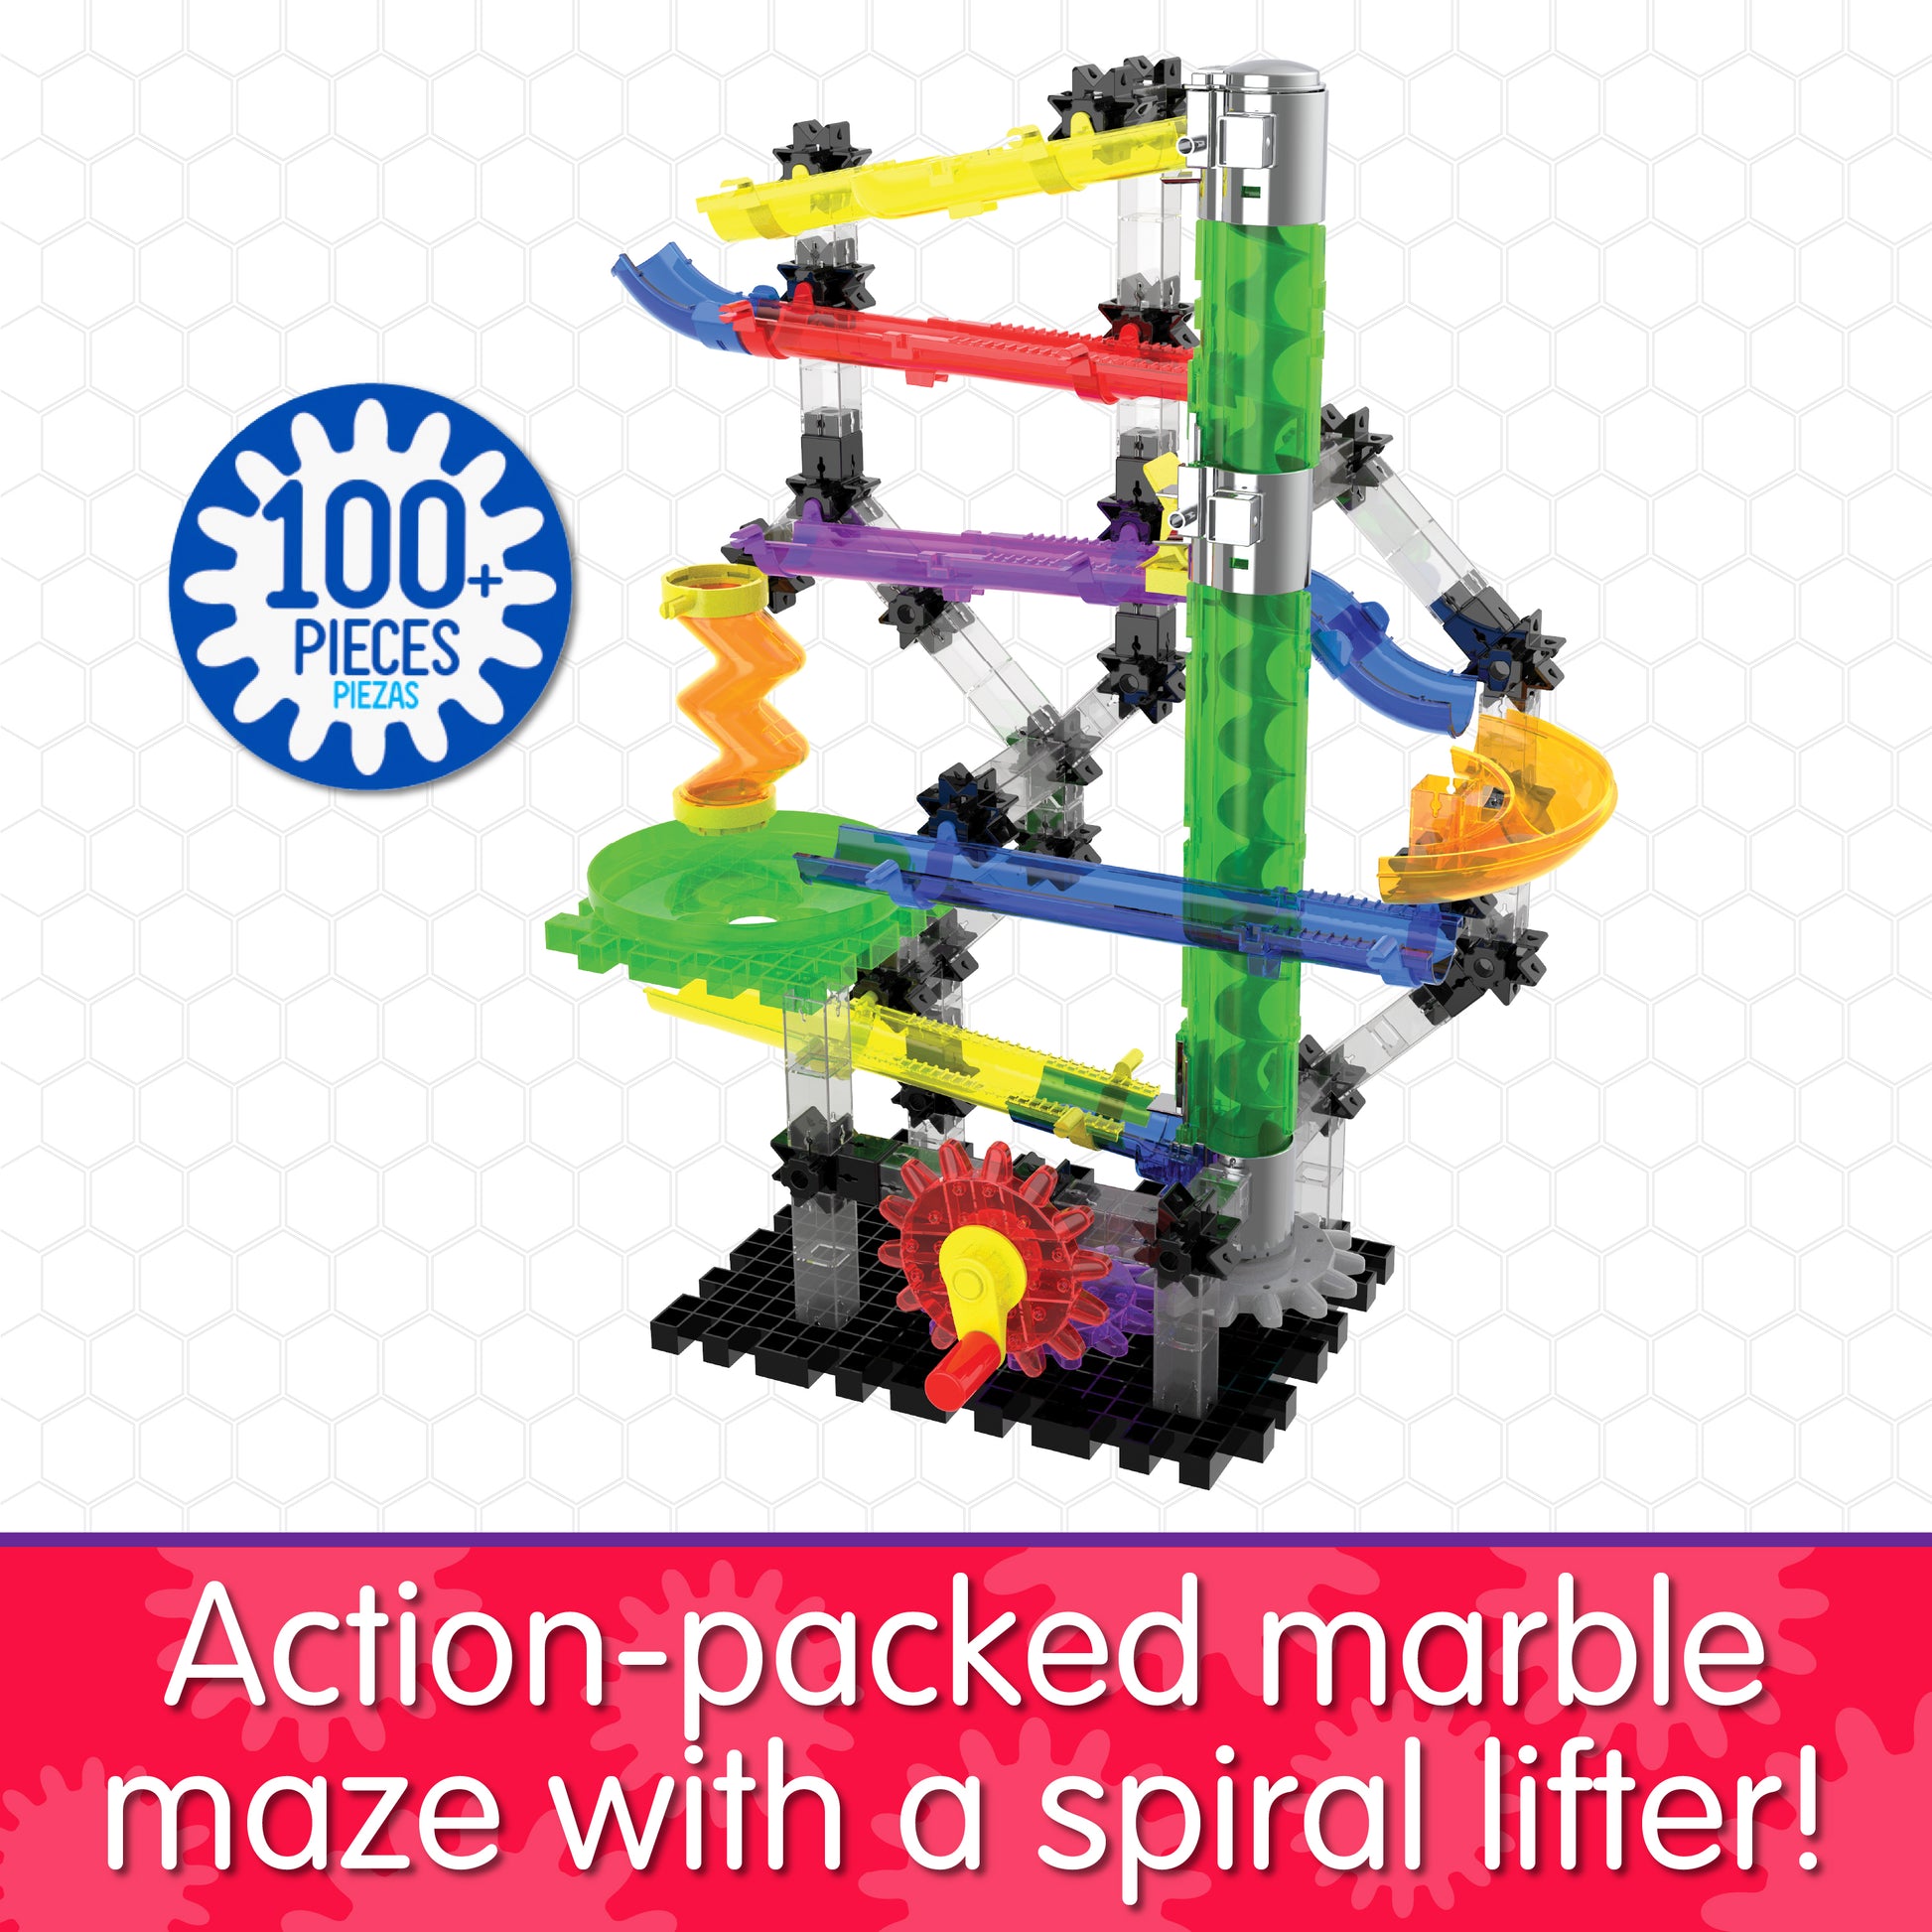 Infographic about Crankster 3.0 that says, "Action-packed marble maze with a spiral lifter!"